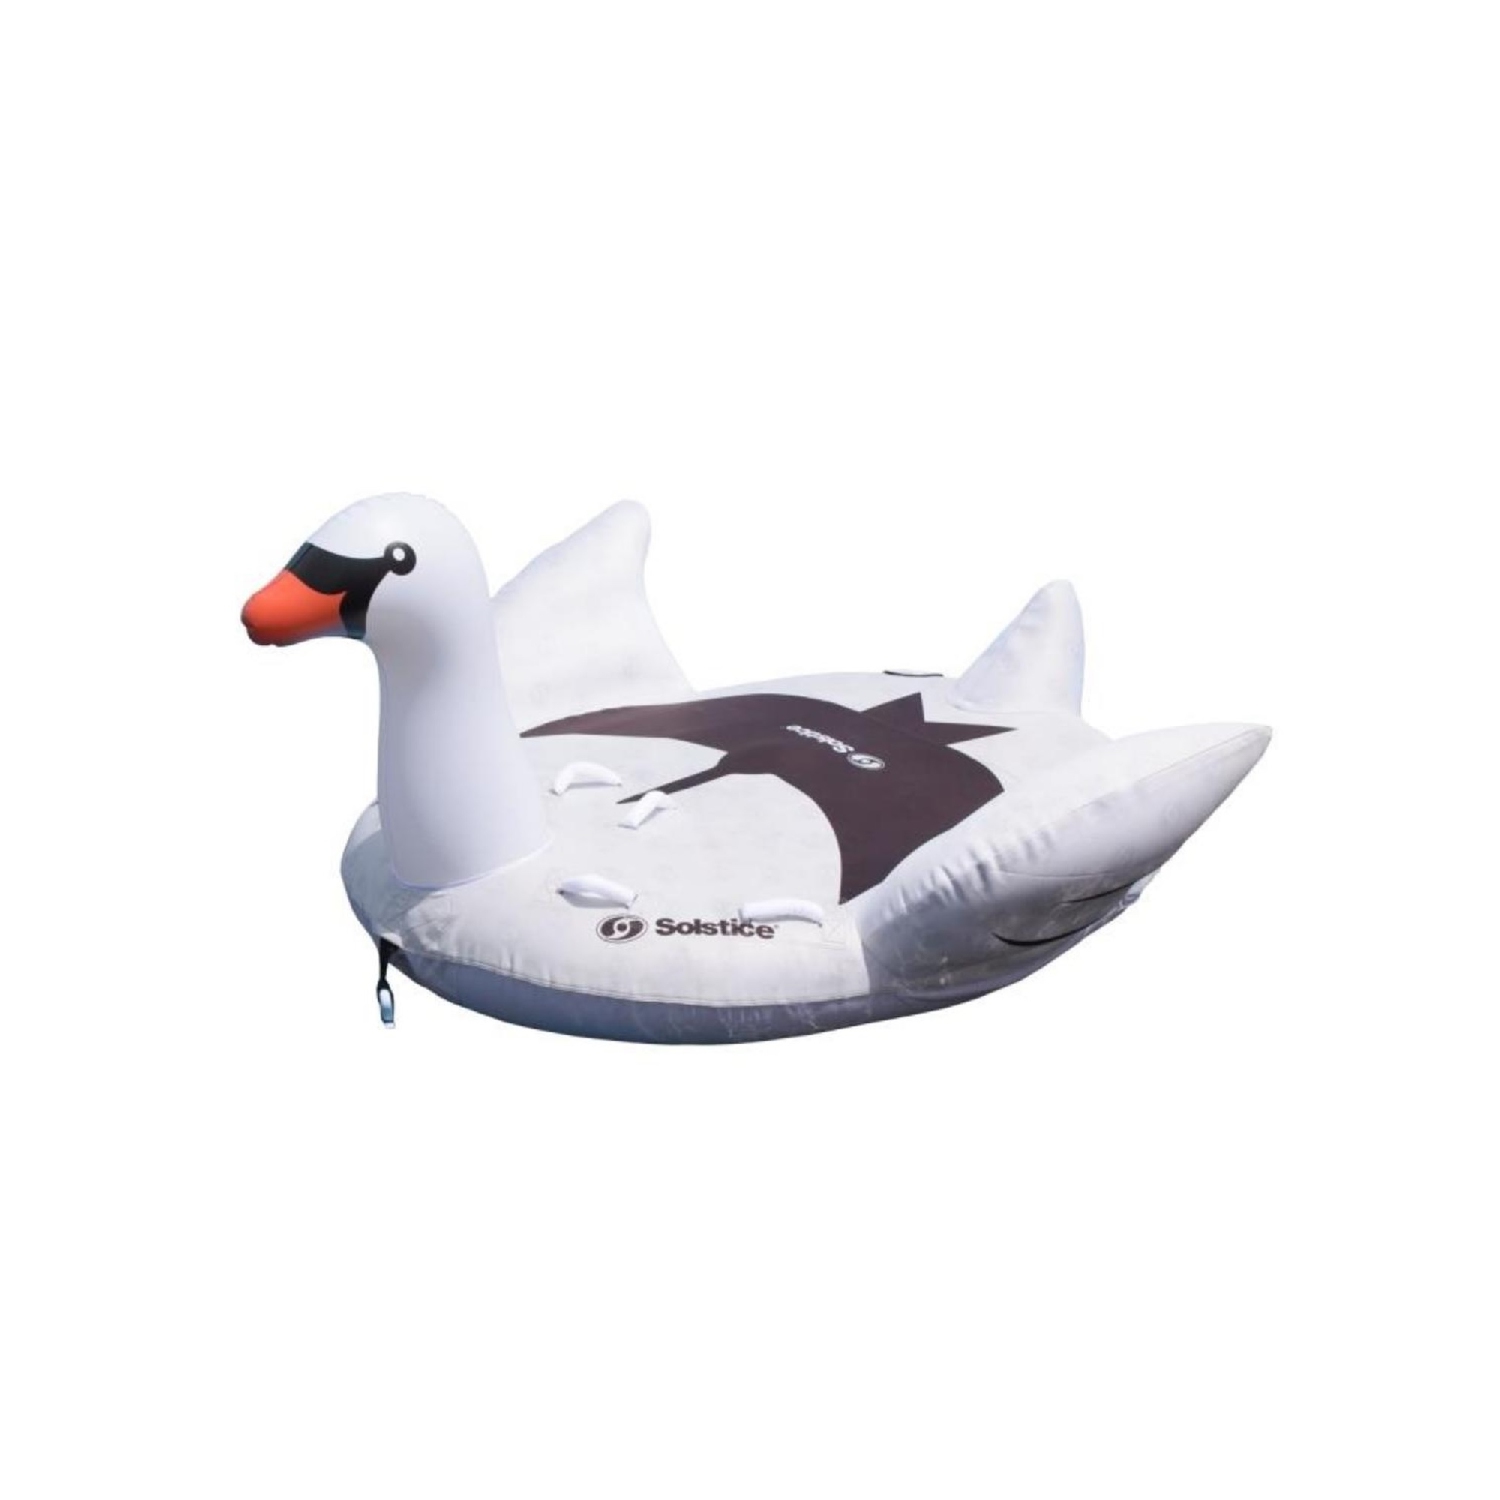 84-Inch Two Person Giant Towable White and Black Lay On Swan With Handles